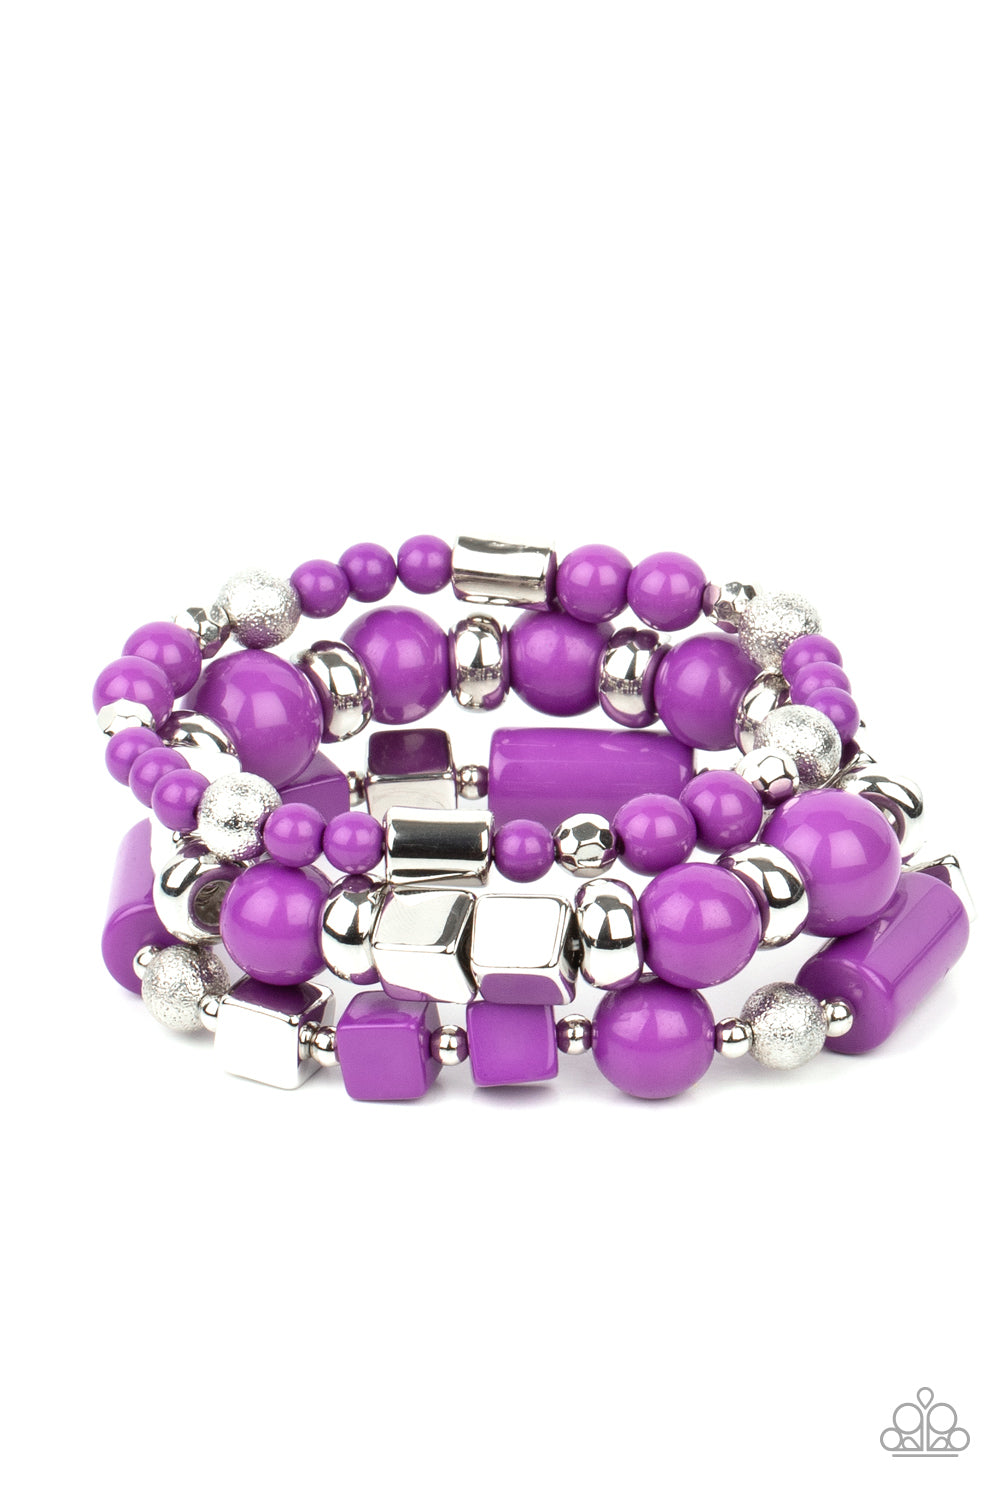 Paparazzi Accessories - Featuring round, cube, and faceted shapes, a colorful collection of purple and silver beads are threaded along stretchy bands around the wrist, 